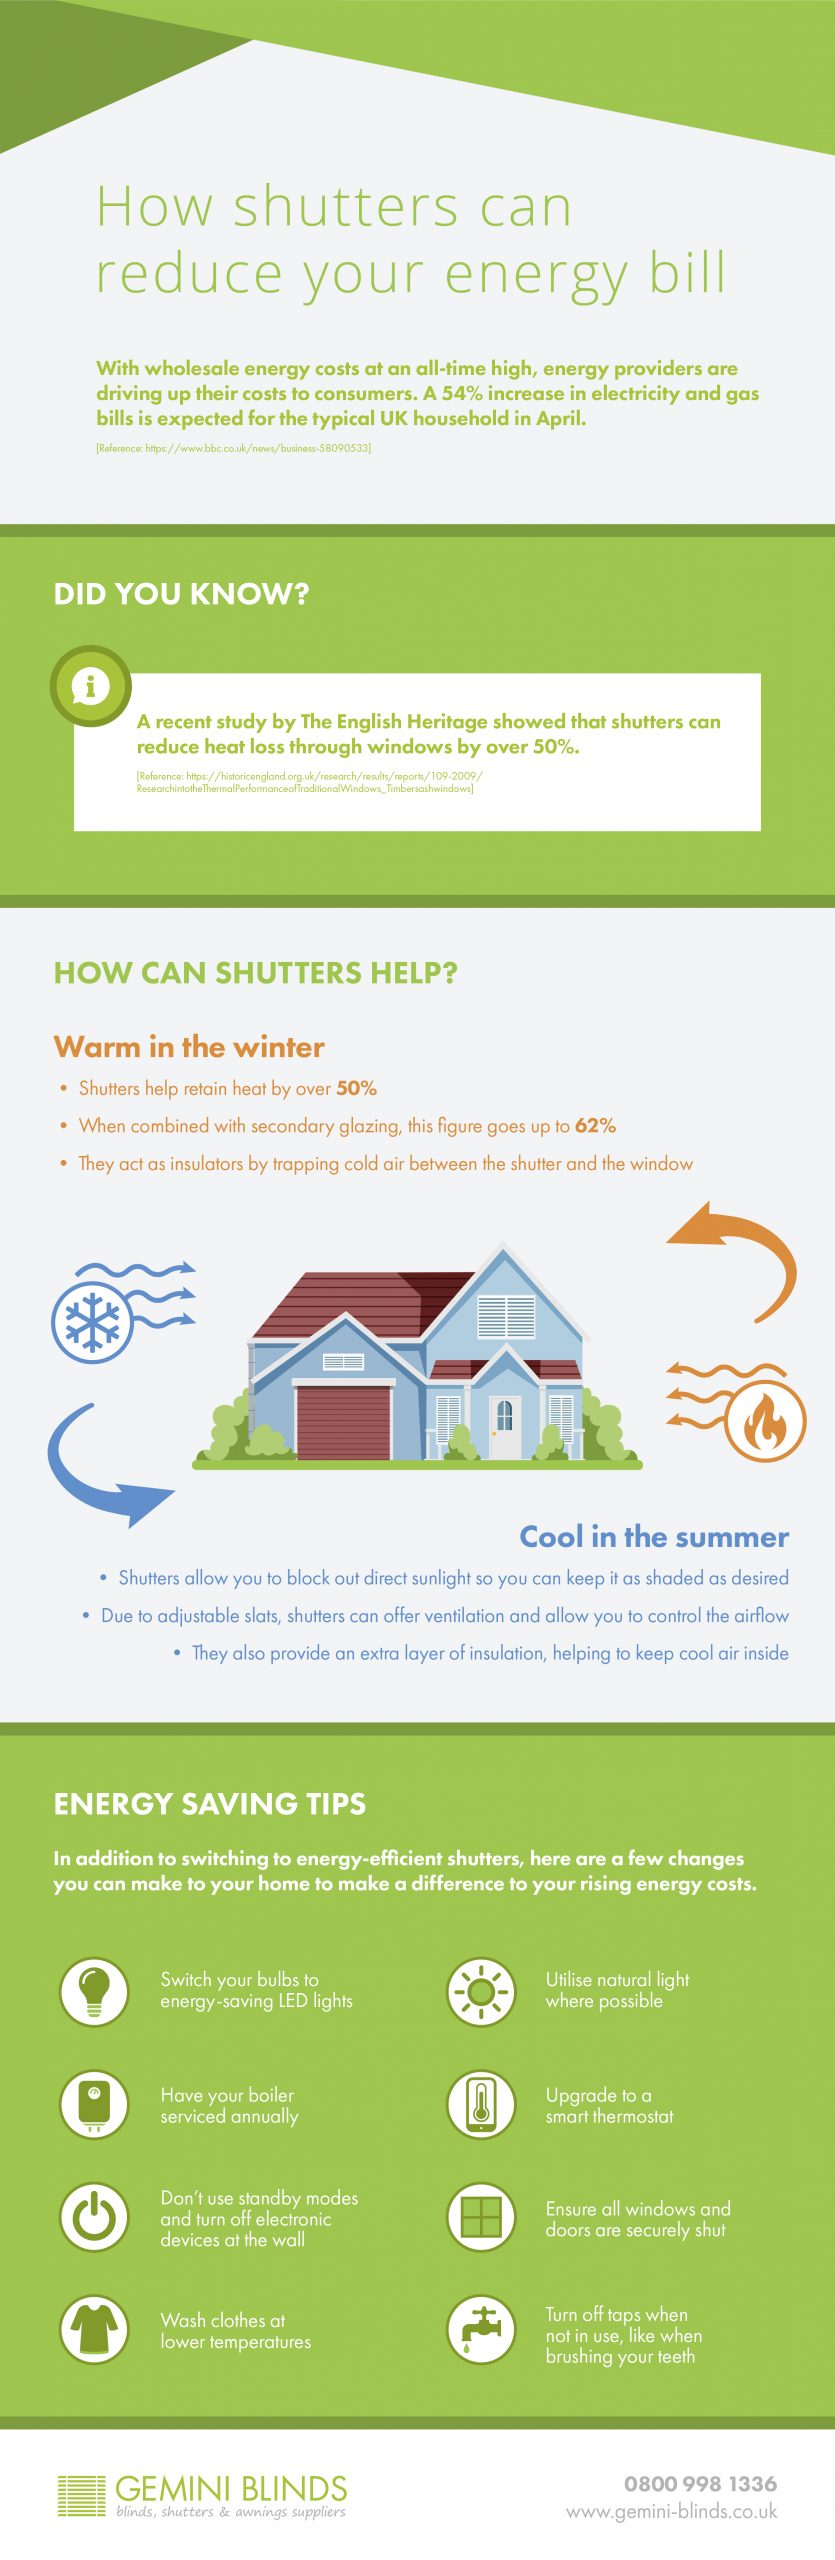 How shutters can help cut costs amid the energy crisis - Infographic